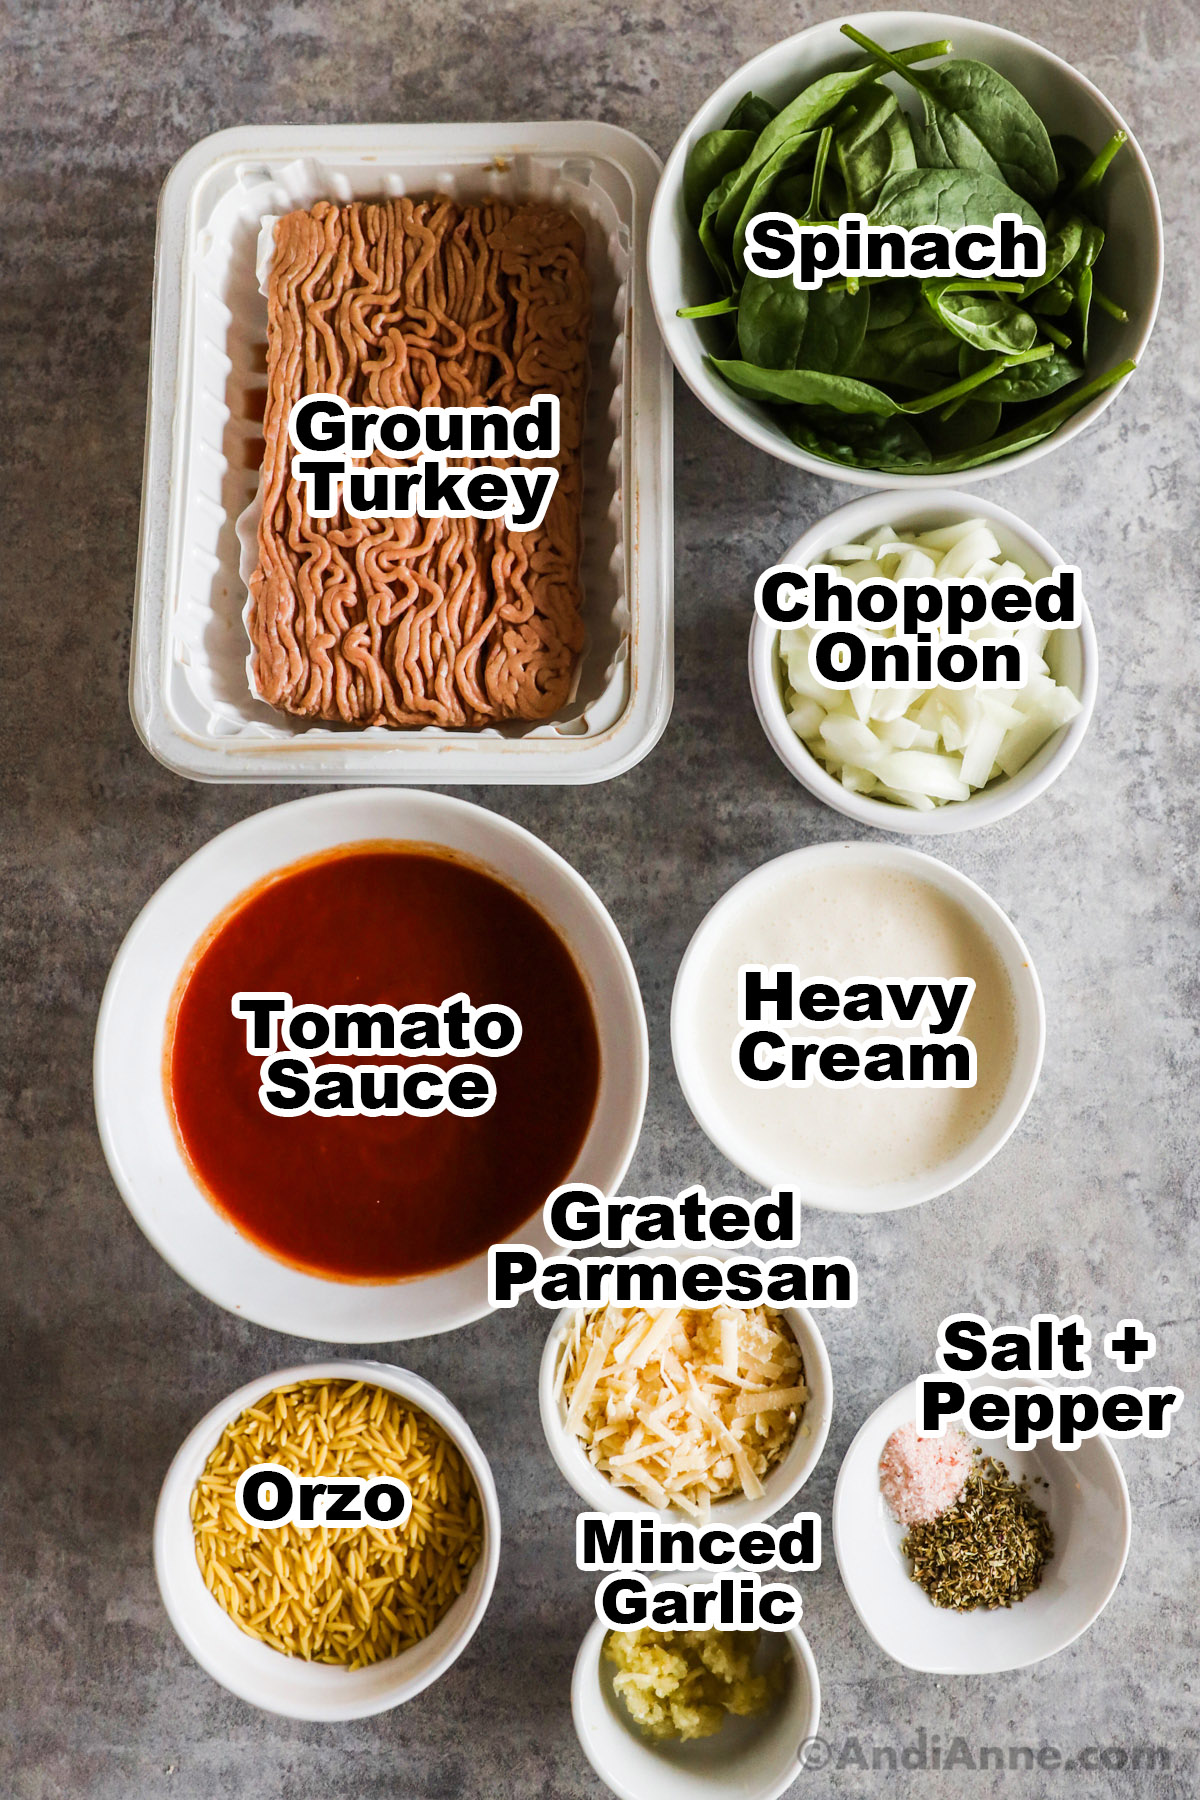 Recipe ingredients in bowls including ground turkey, spinach, chopped onion, tomato sauce, heavy cream, grated parmesan, orzo, minced garlic, salt and pepper.